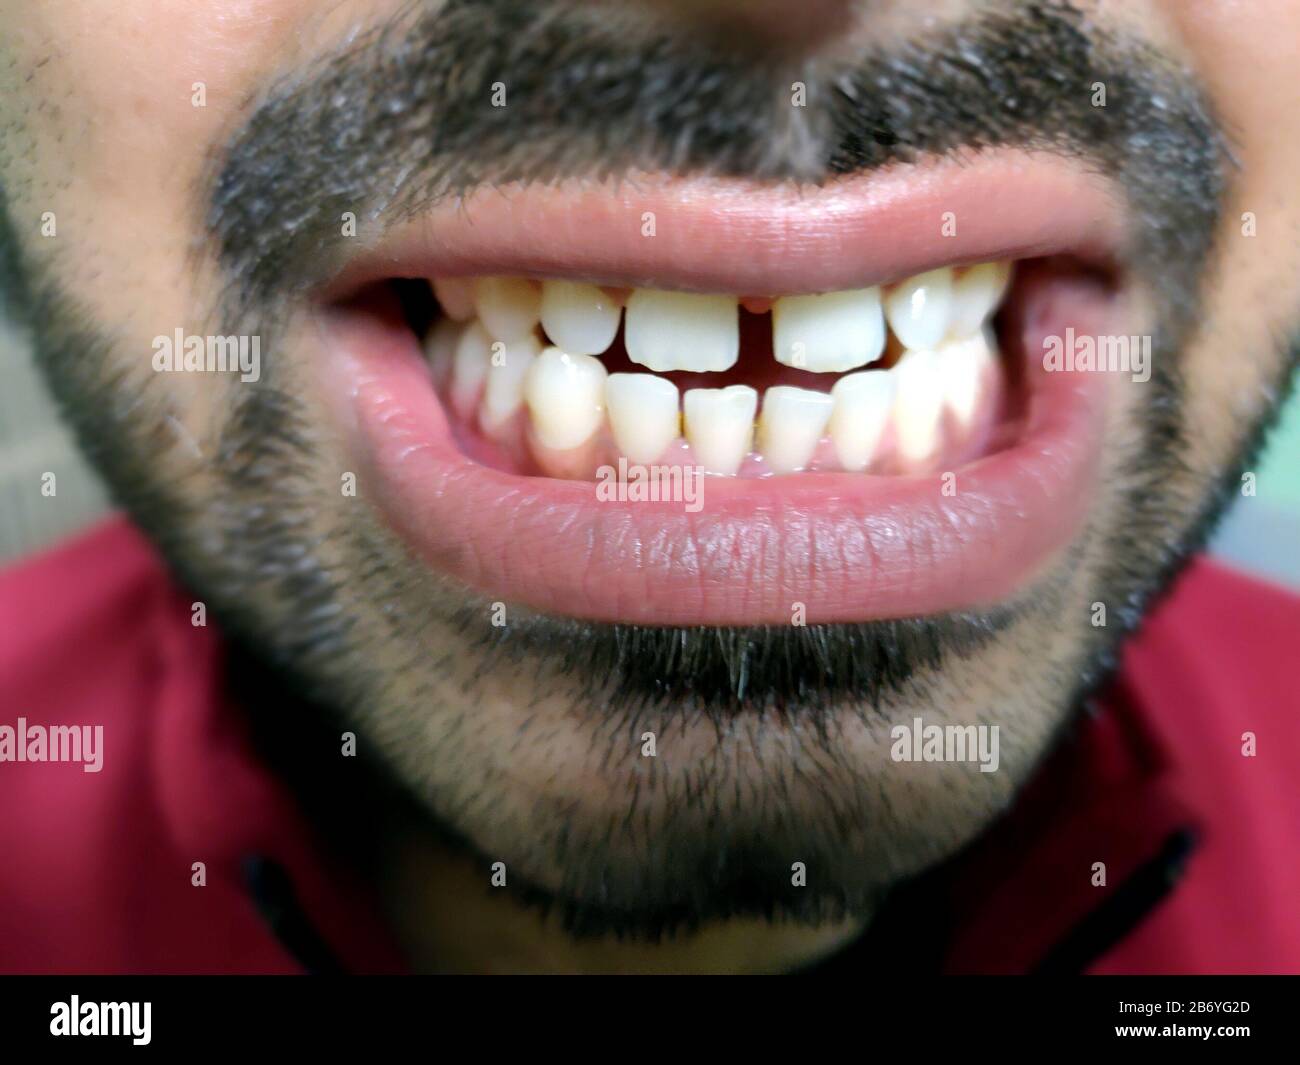 A man with a beard shows his teeth, he has a tooth gap. Stock Photo